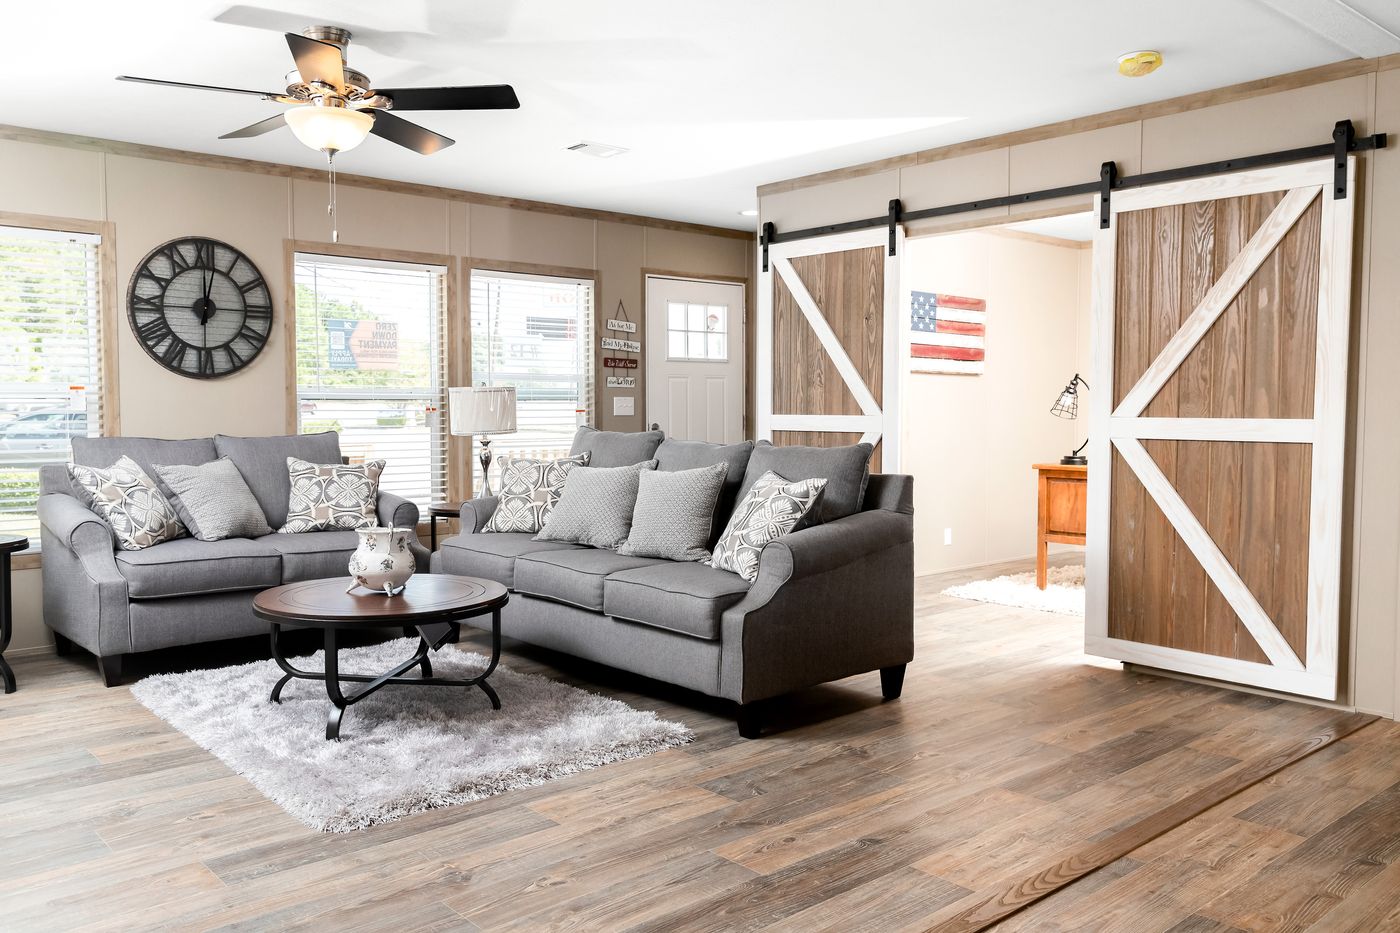 The FARMHOUSE FLEX Living Room. This Manufactured Mobile Home features 3 bedrooms and 2.5 baths.